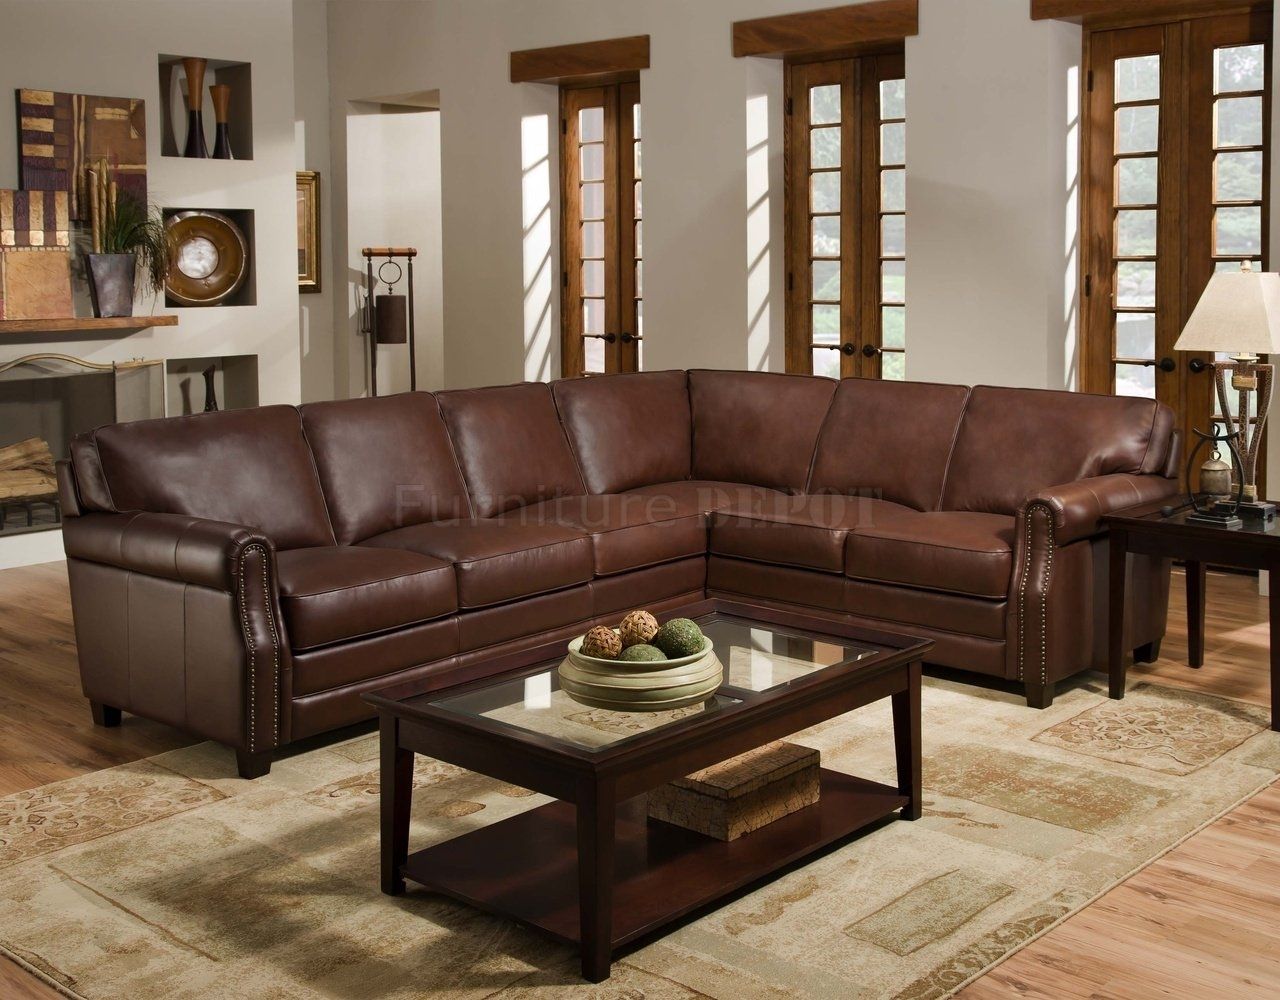 Beautiful Cheap Sectional Sofas Under 200 91 About Remodel Rooms To With Regard To Sectional Sofas Under 200 